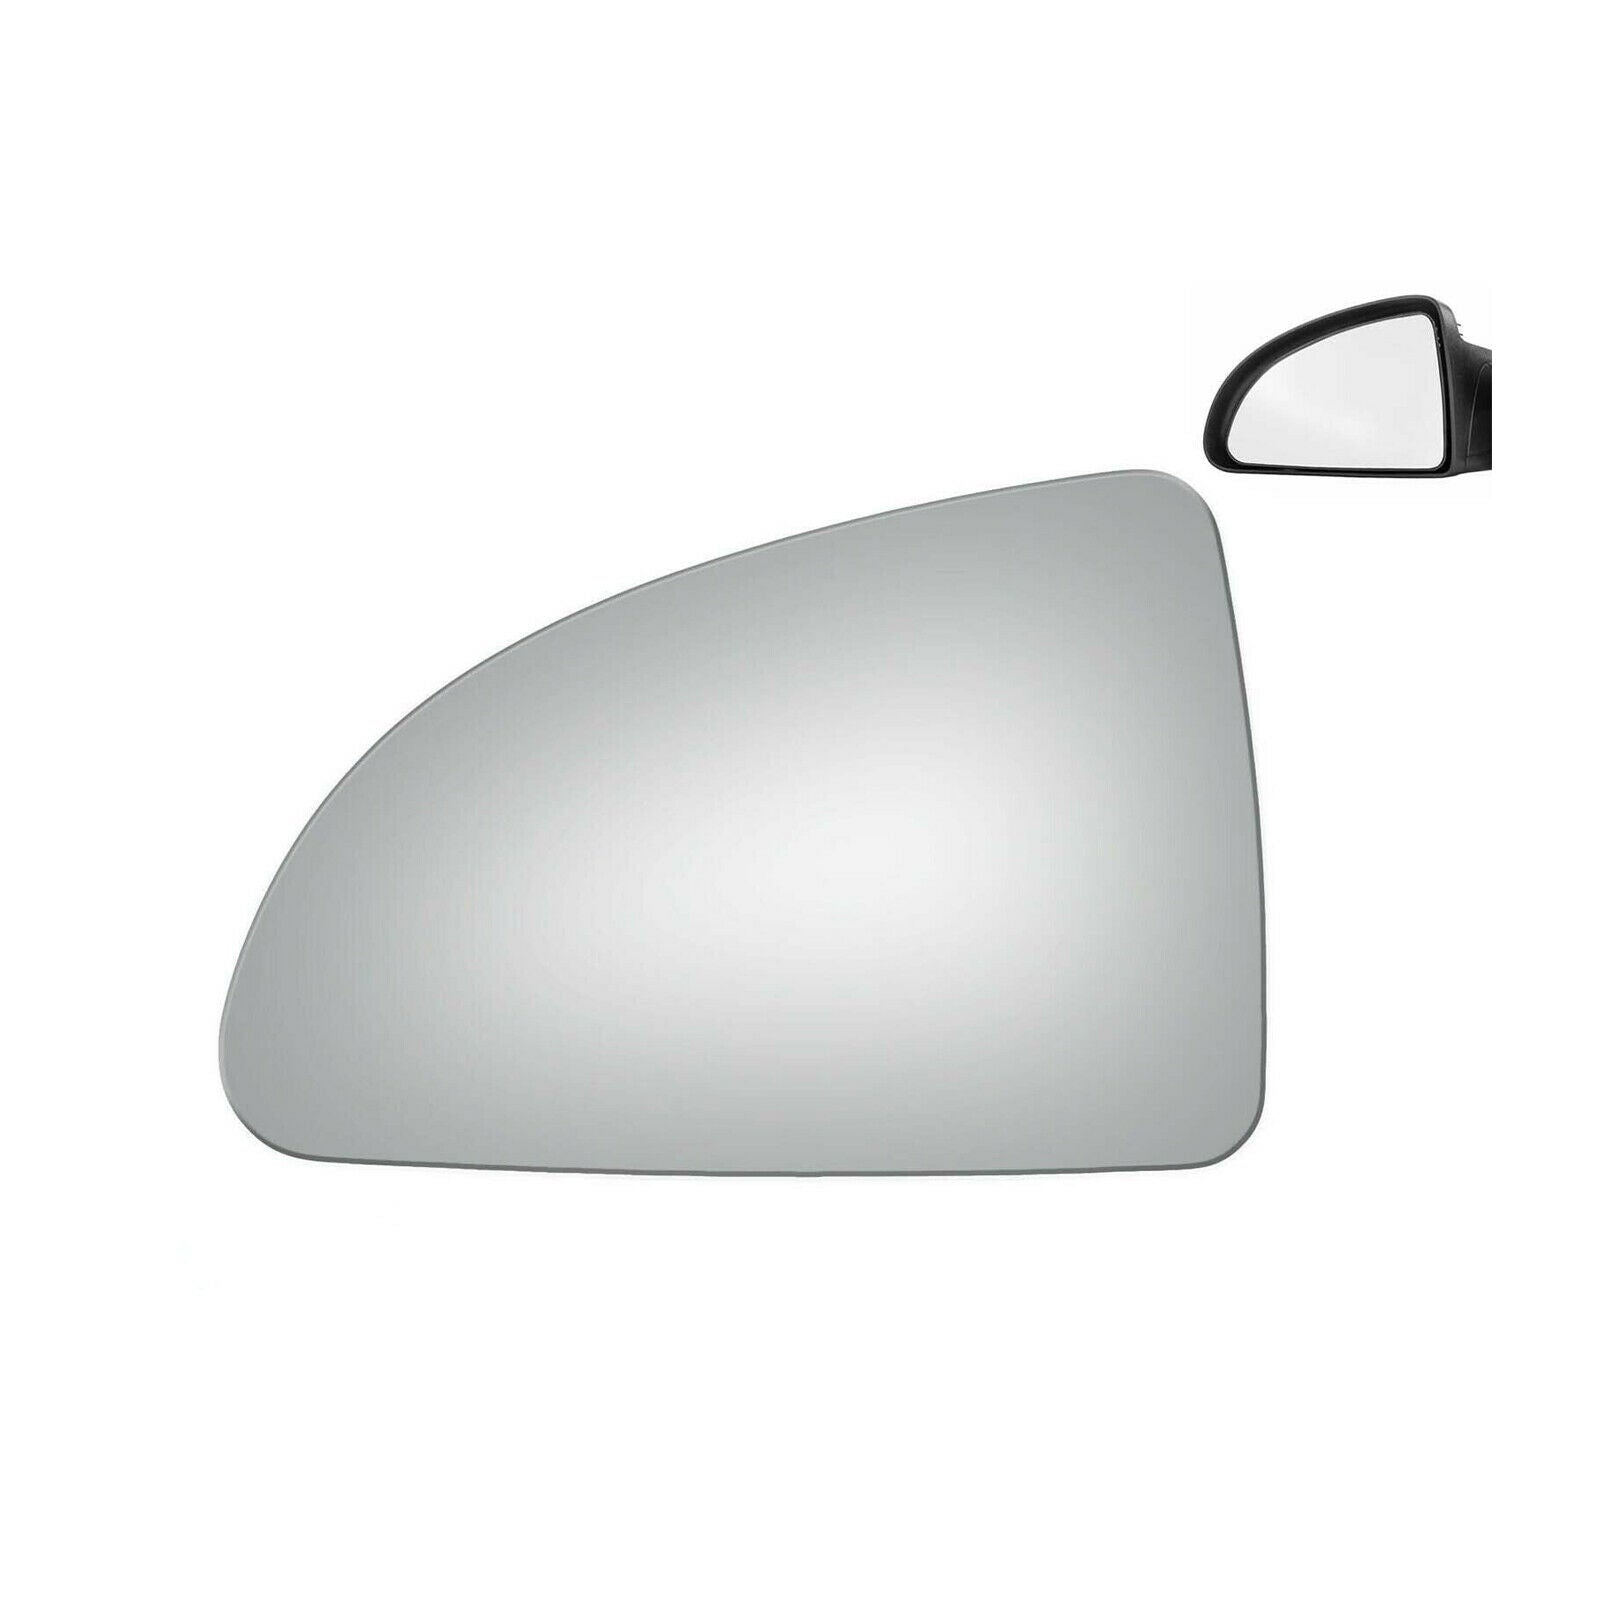 WLLW Replacement Mirror Glass for 2005-2010 Chevrolet Cobalt/2007-2010 PONTIAC G5, Driver Left Side LH/Passenger Right Side RH/The Both Sides Flat Convex M-0065